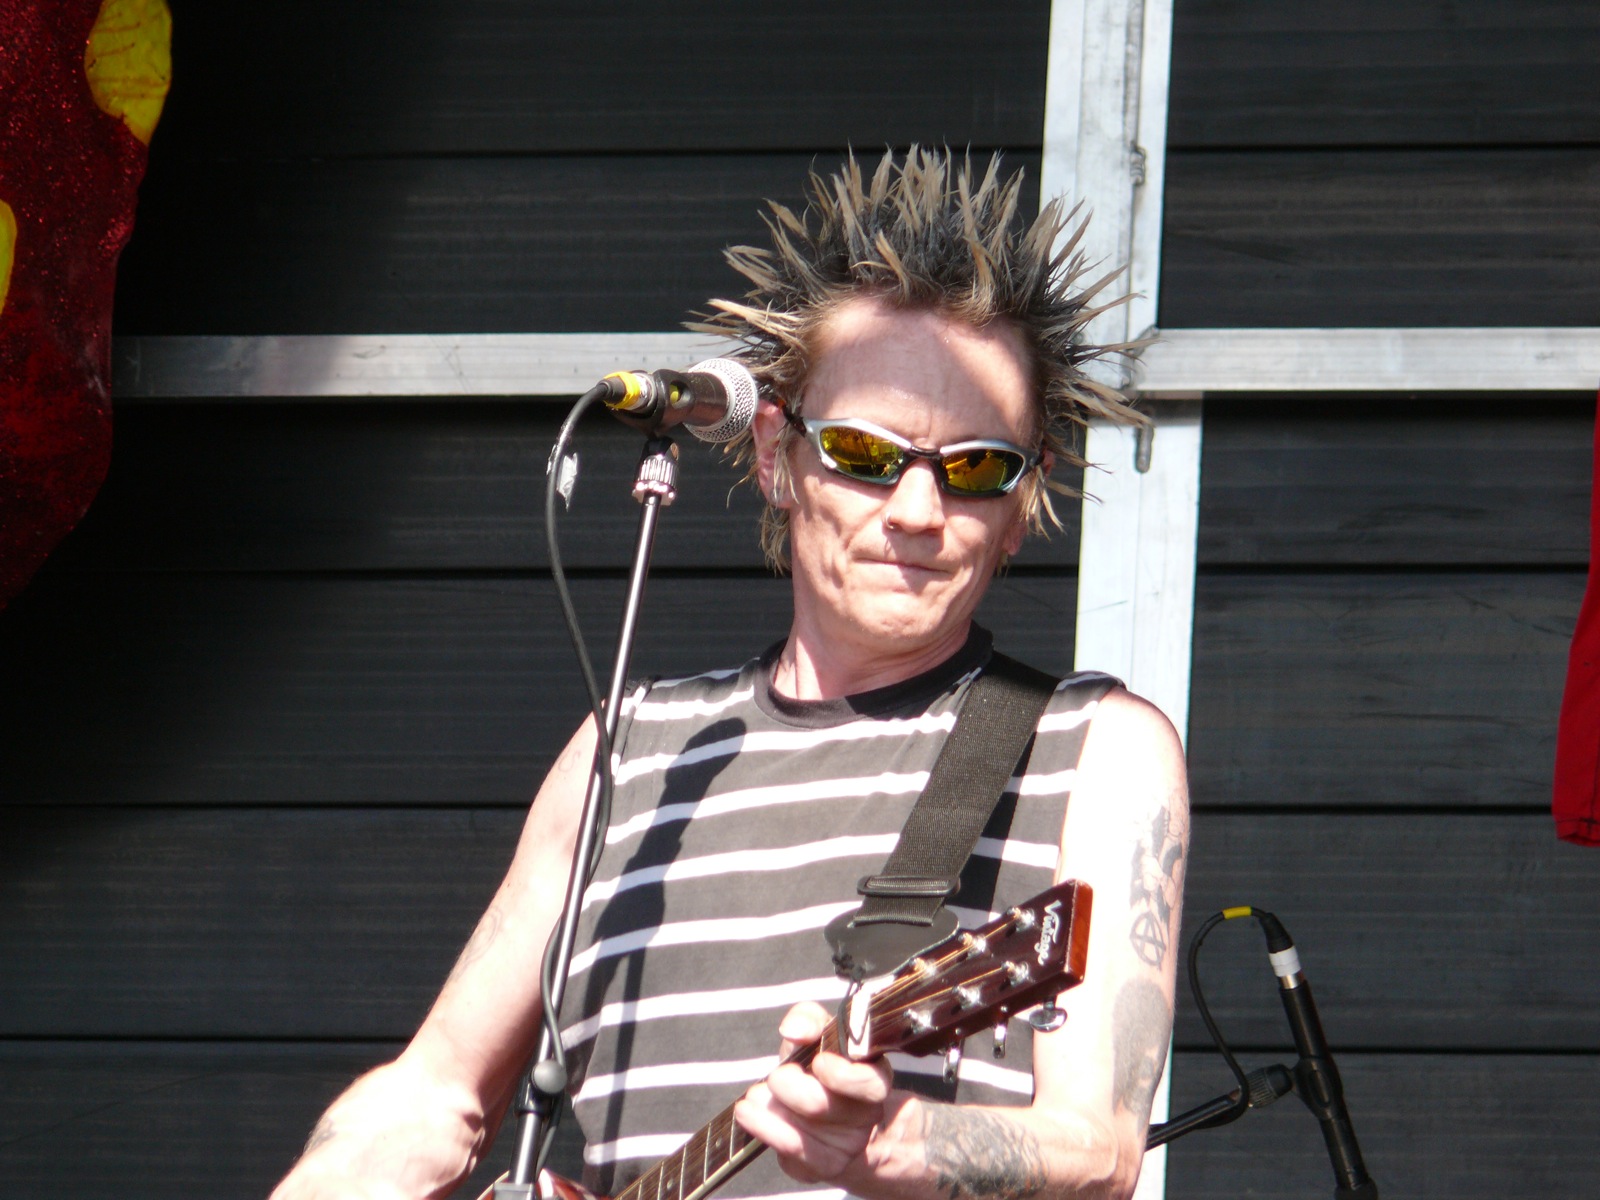 a man with spike hair plays guitar in front of a microphone